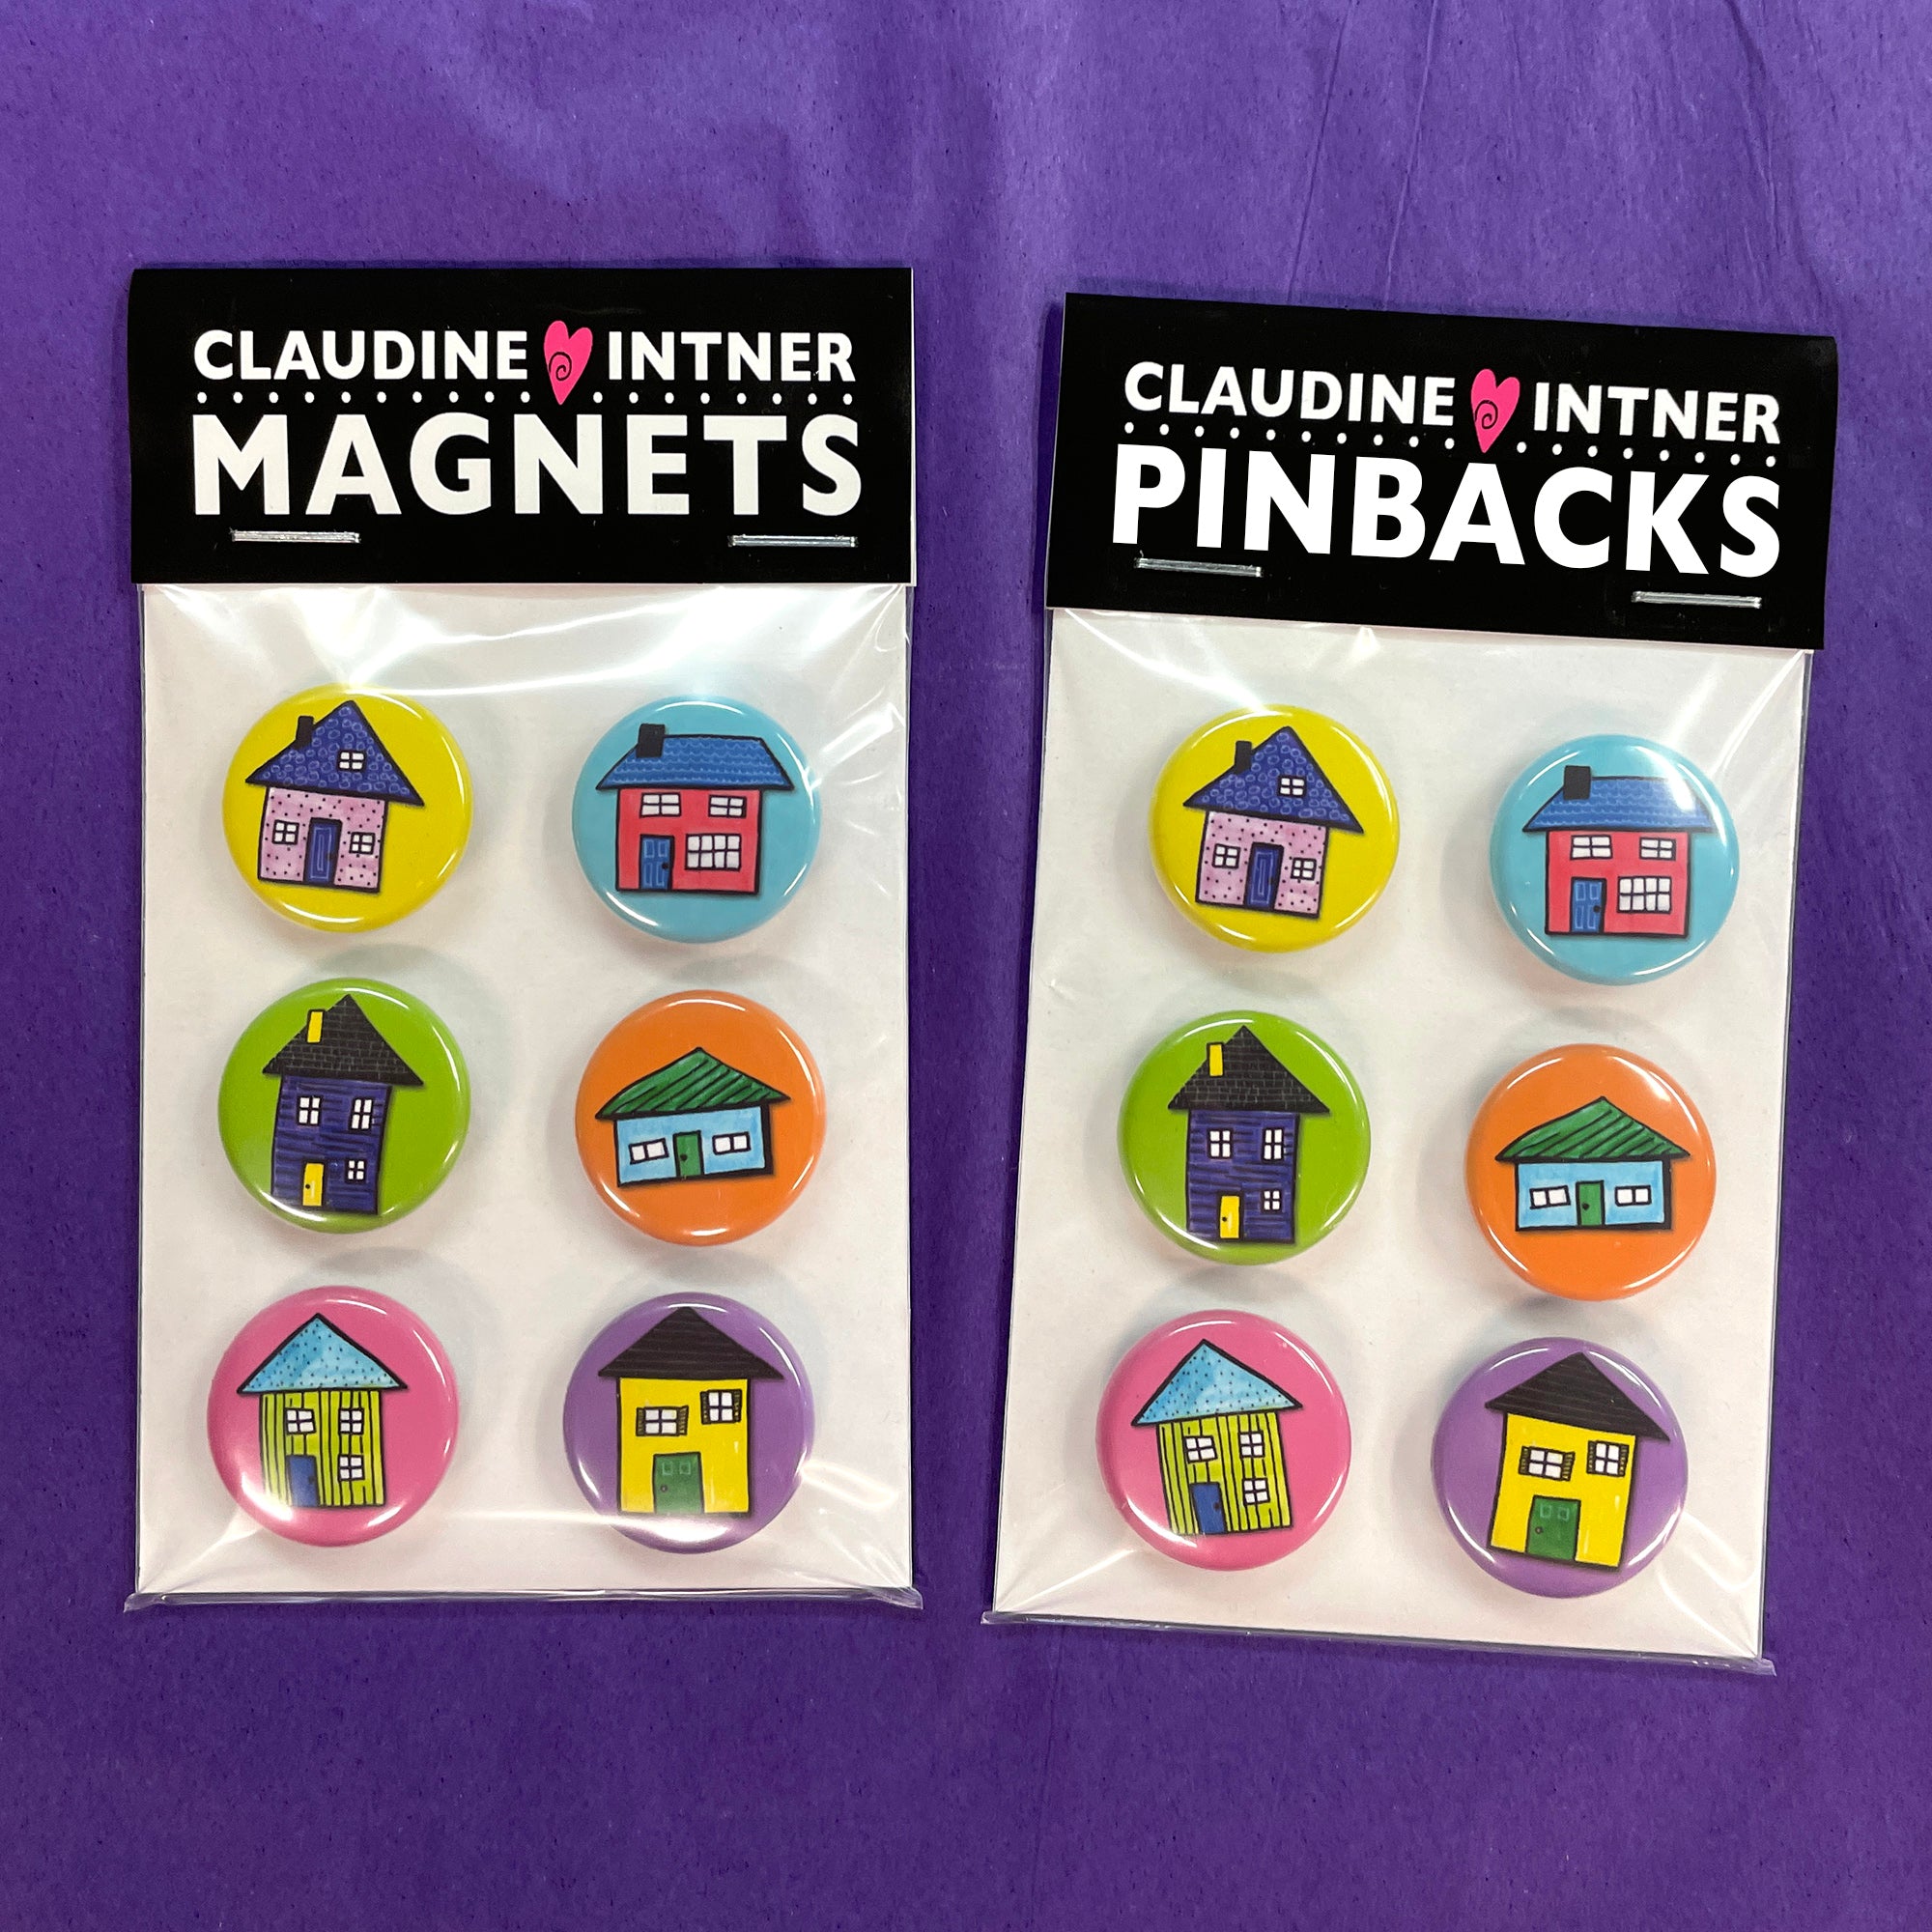 House Magnets or House Pinback Buttons